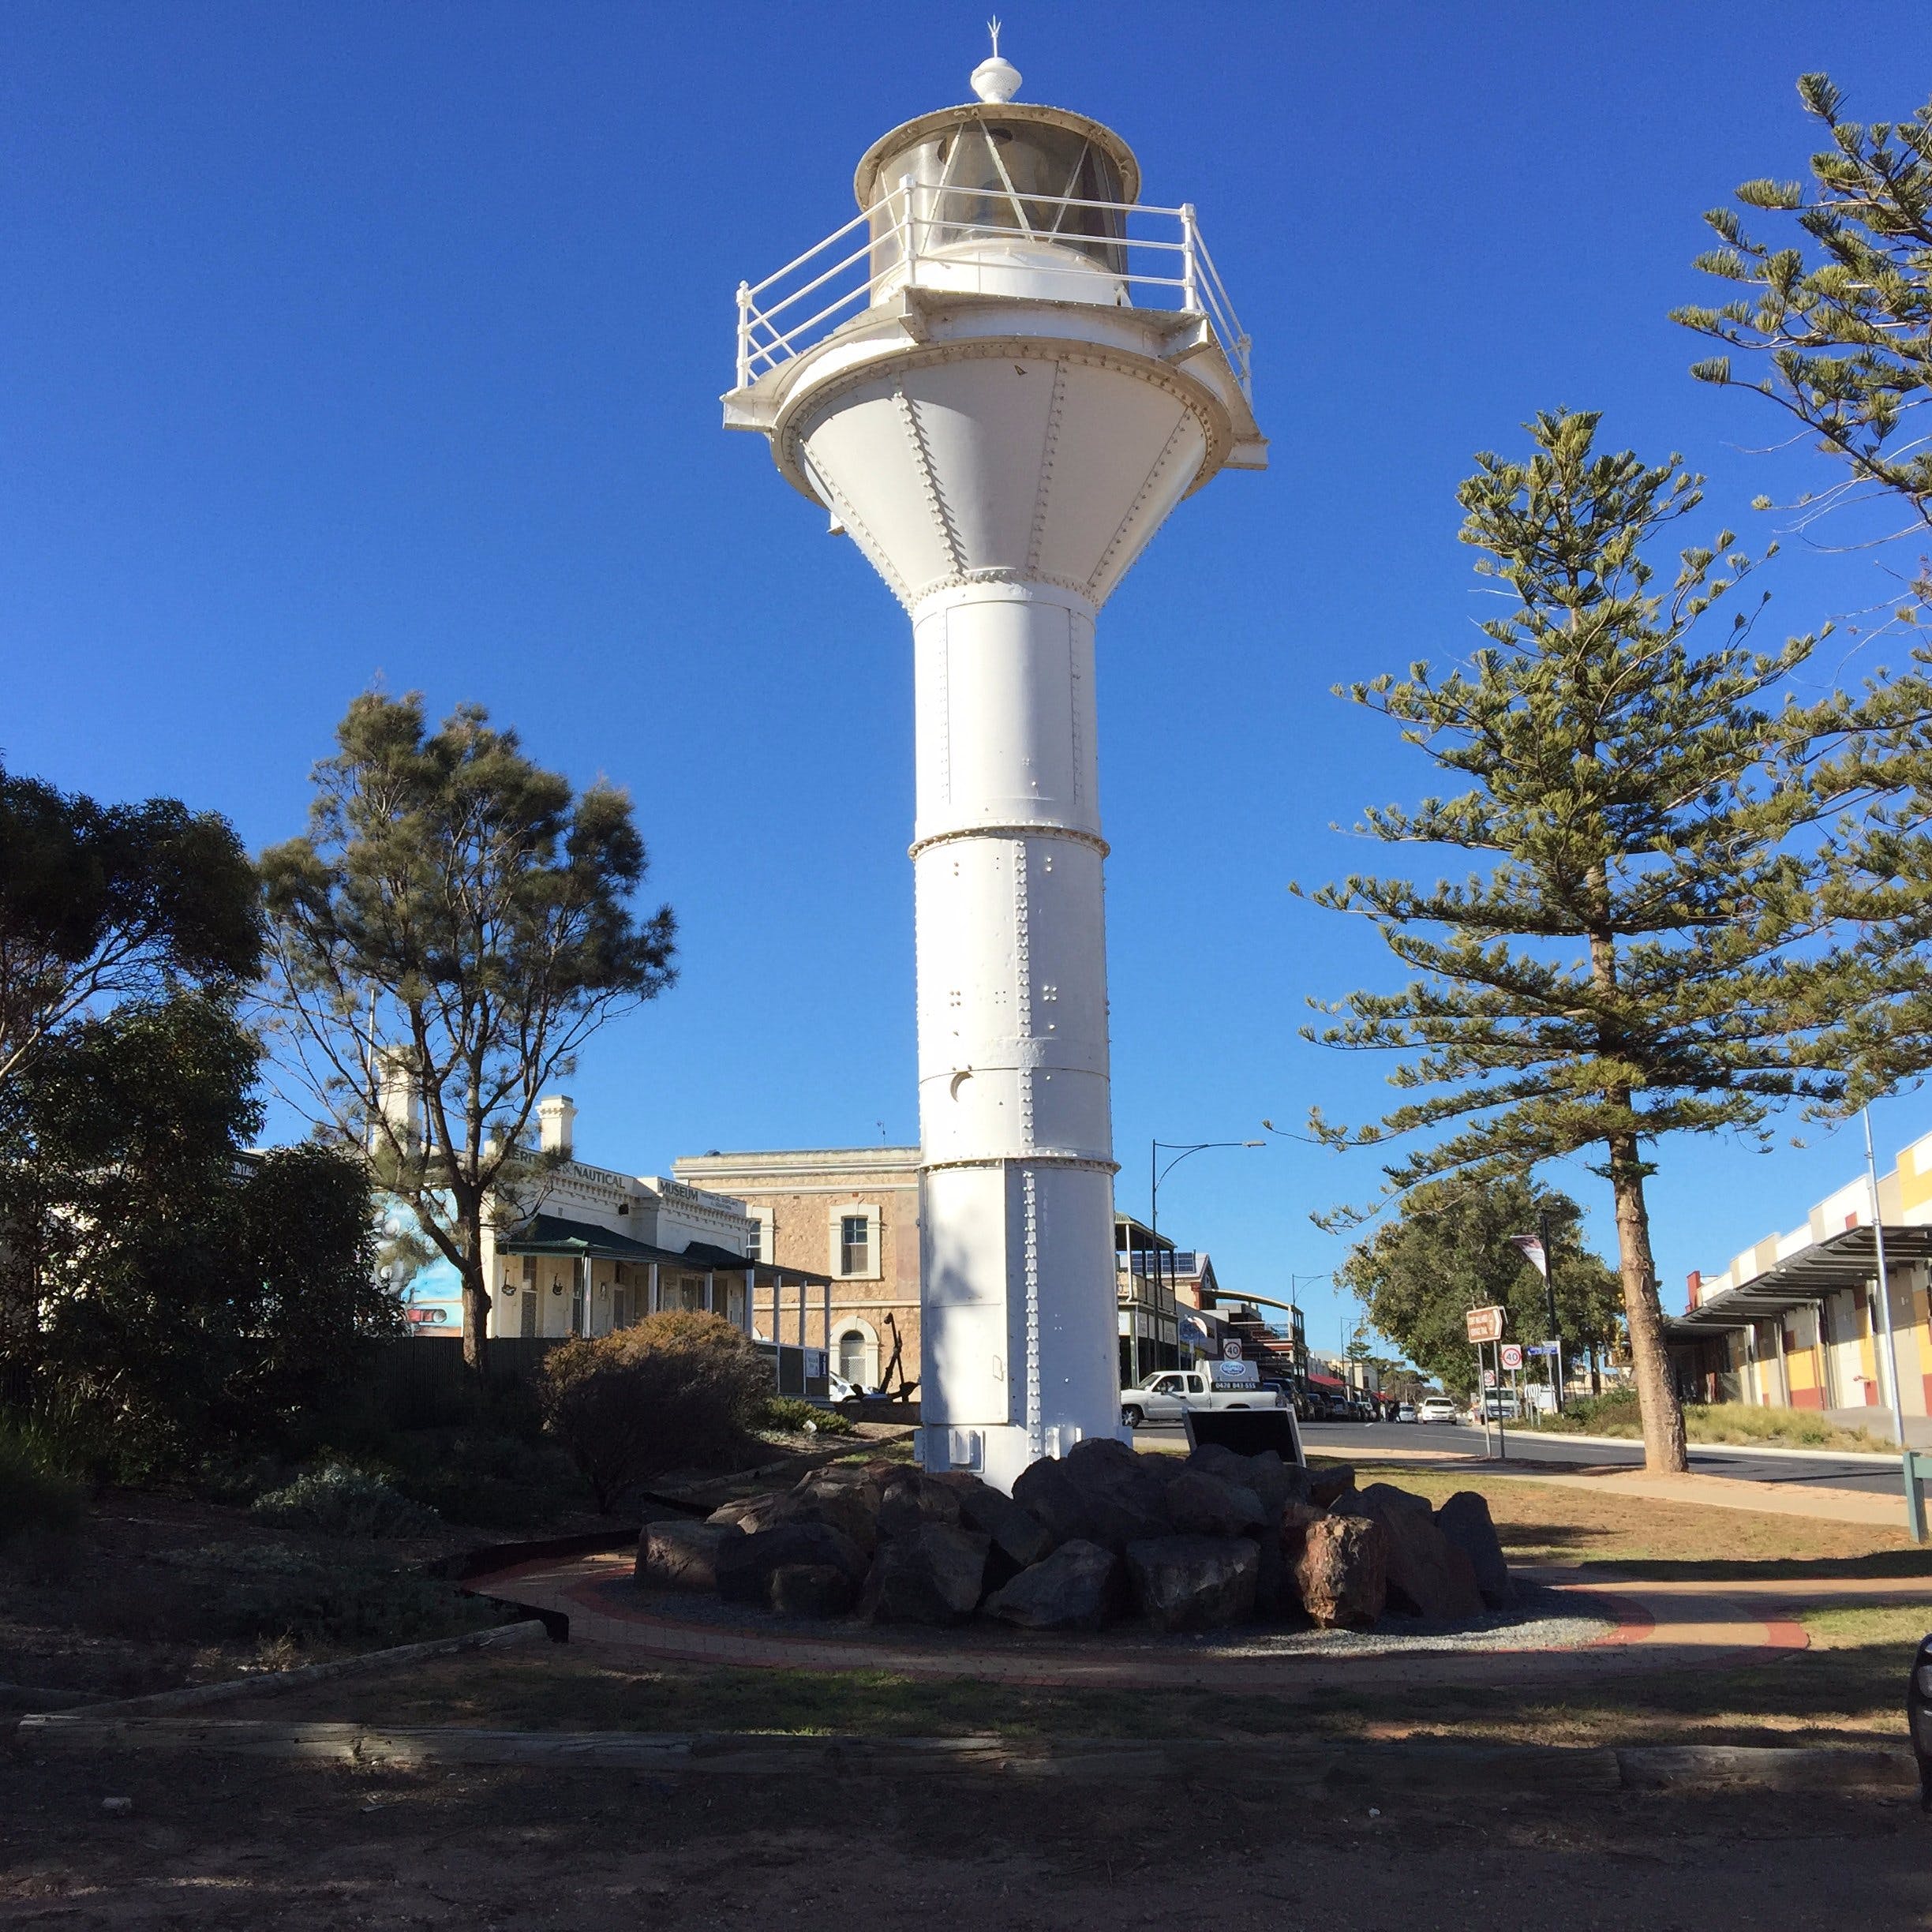 Tipara Lighthouse Wallaroo - Find Attractions